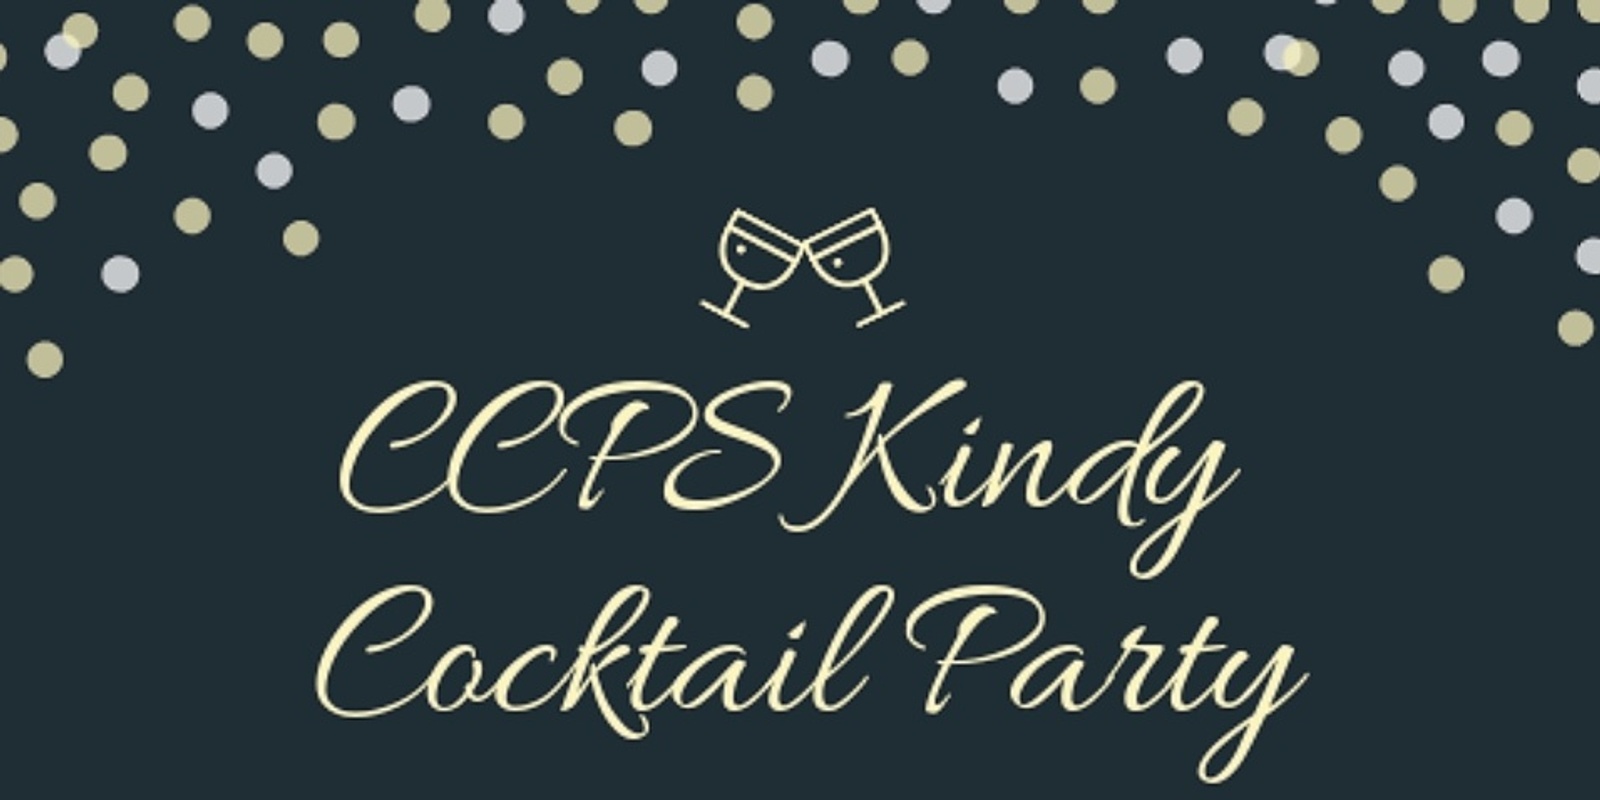 Banner image for CCPS Kindy Cocktail Party